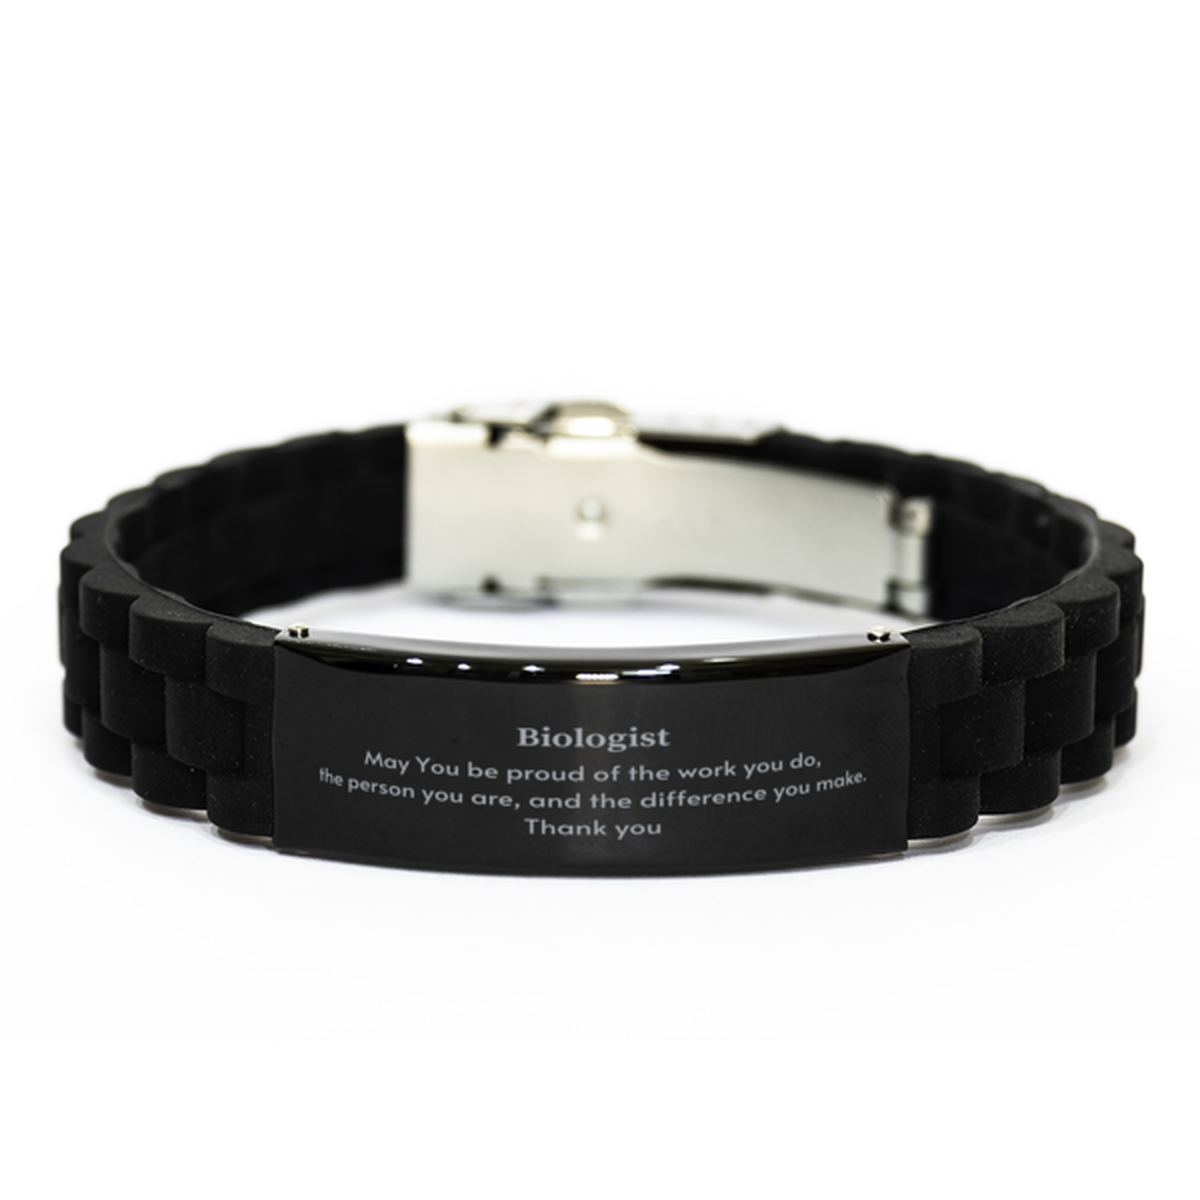 Heartwarming Black Glidelock Clasp Bracelet Retirement Coworkers Gifts for Biologist, Biologist May You be proud of the work you do, the person you are Gifts for Boss Men Women Friends